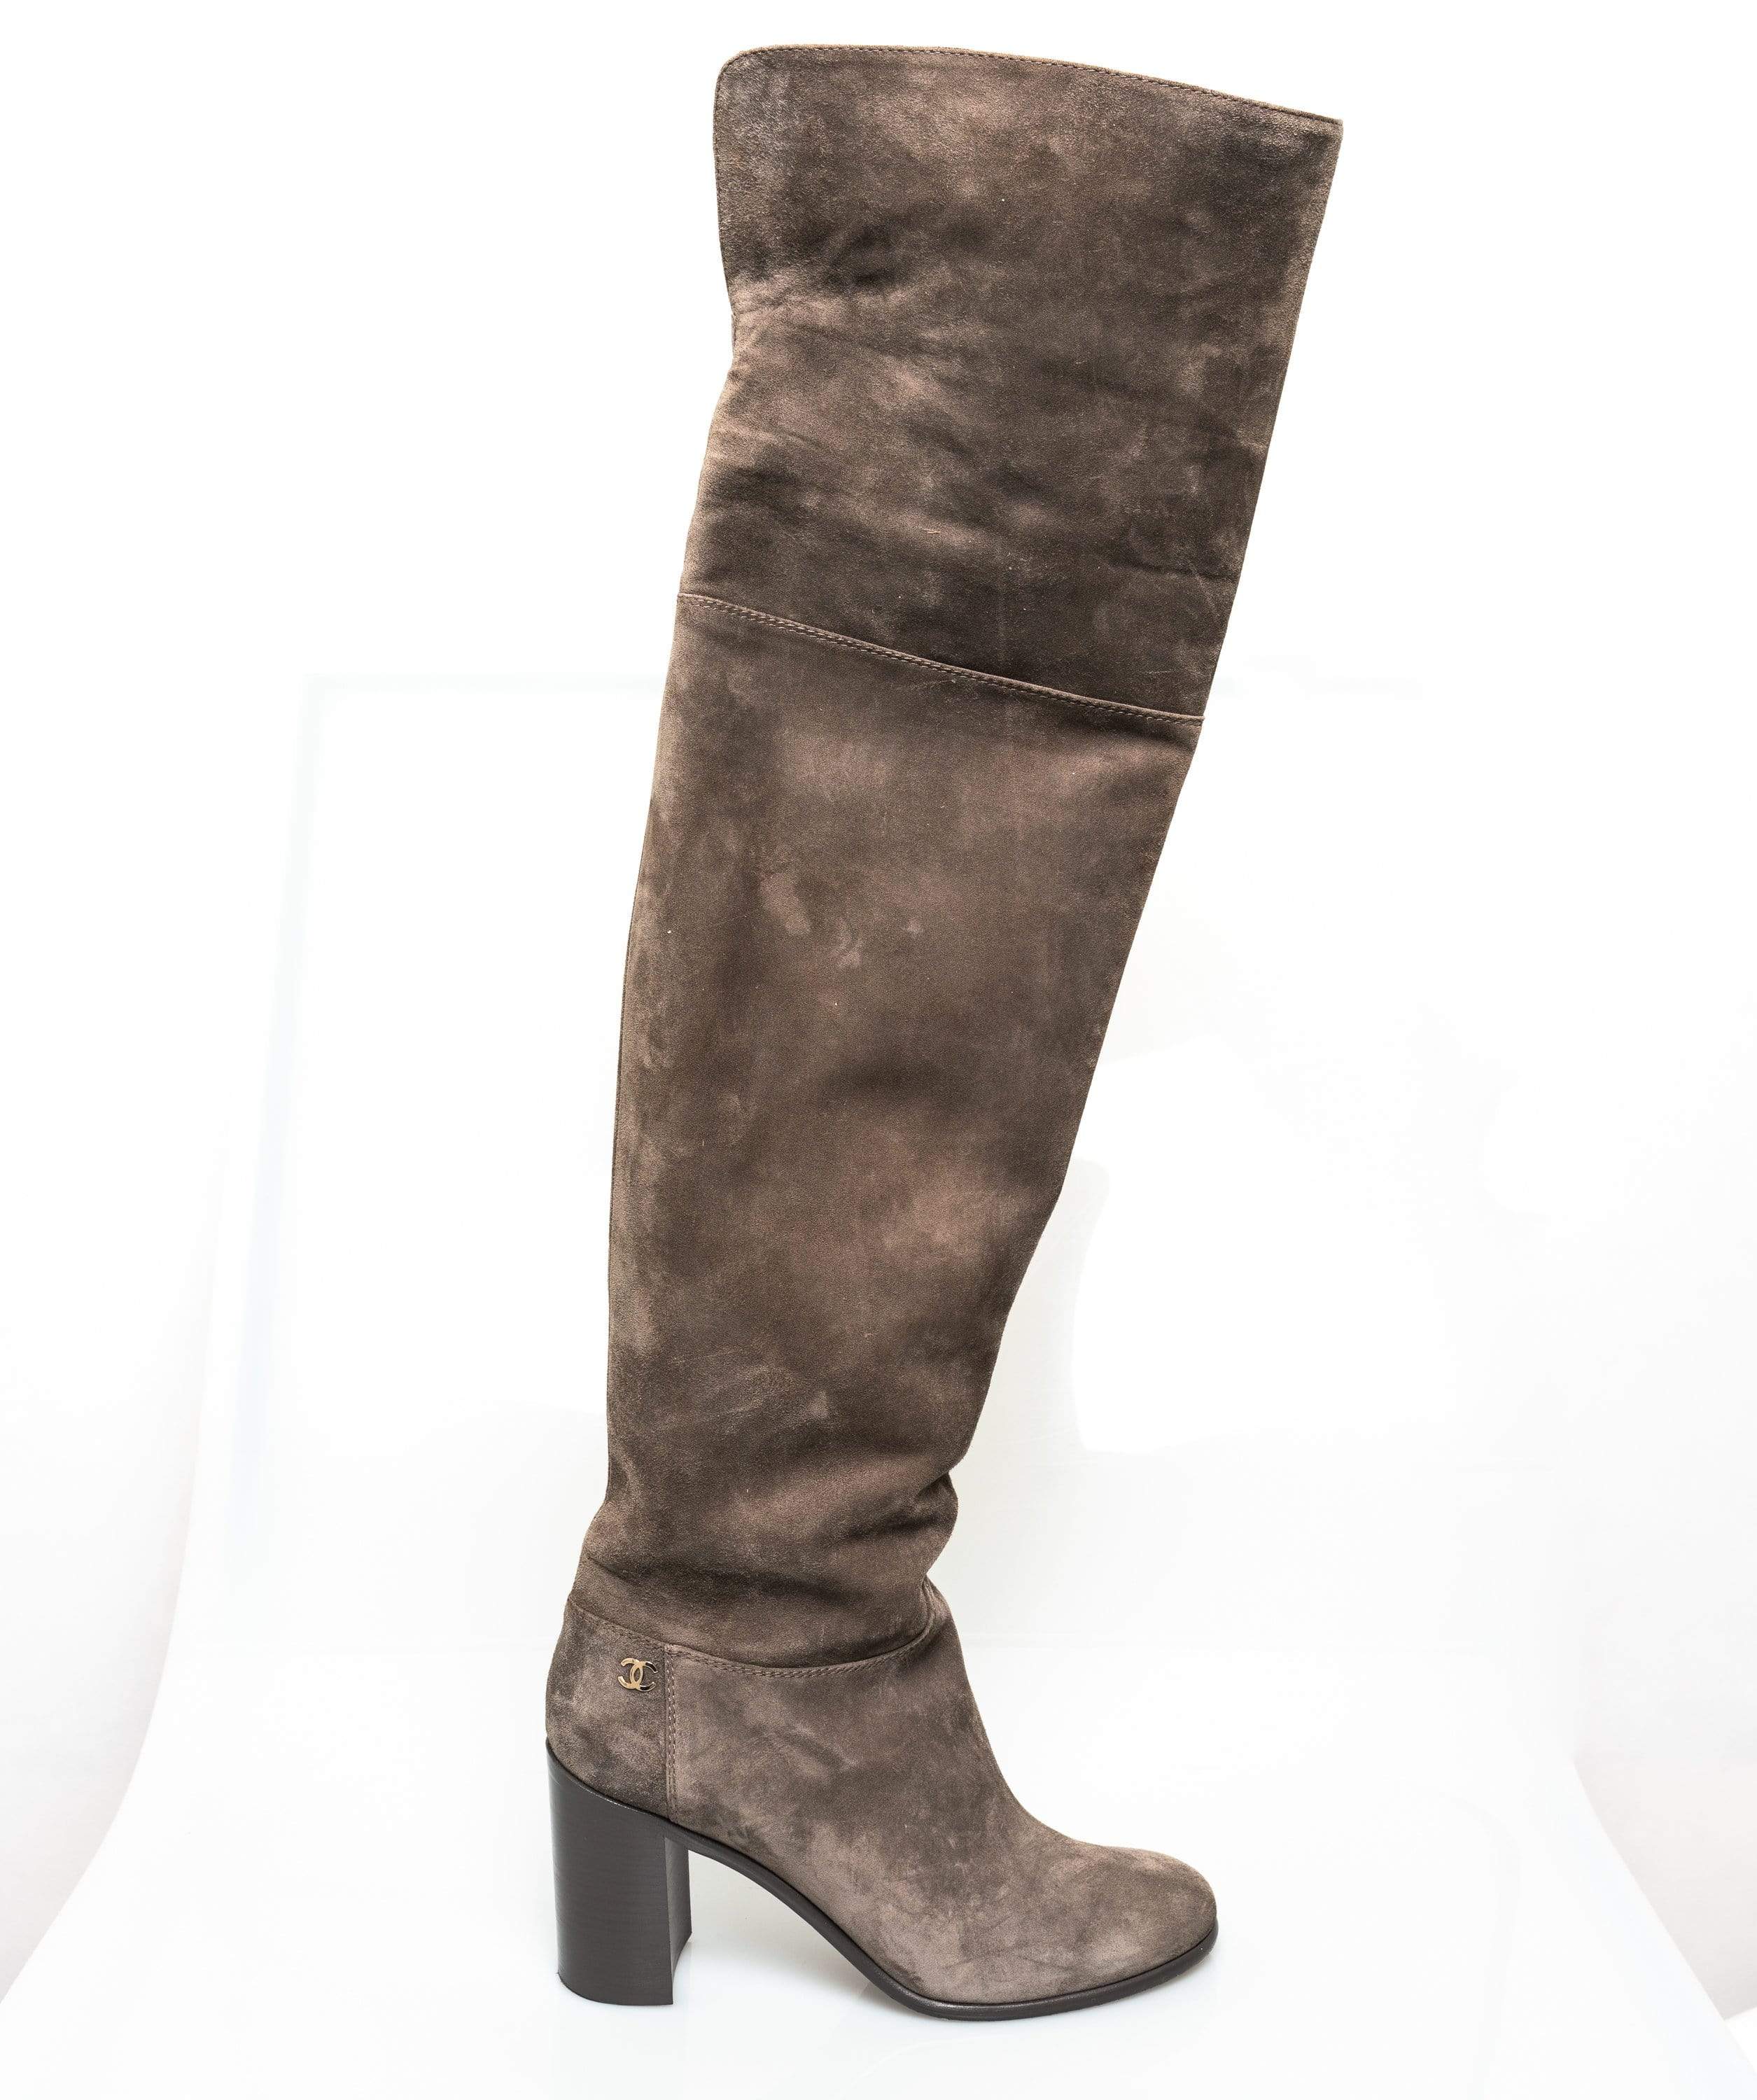 Chanel Chanel Grey Suede Knee High boots size 40- ASC1128